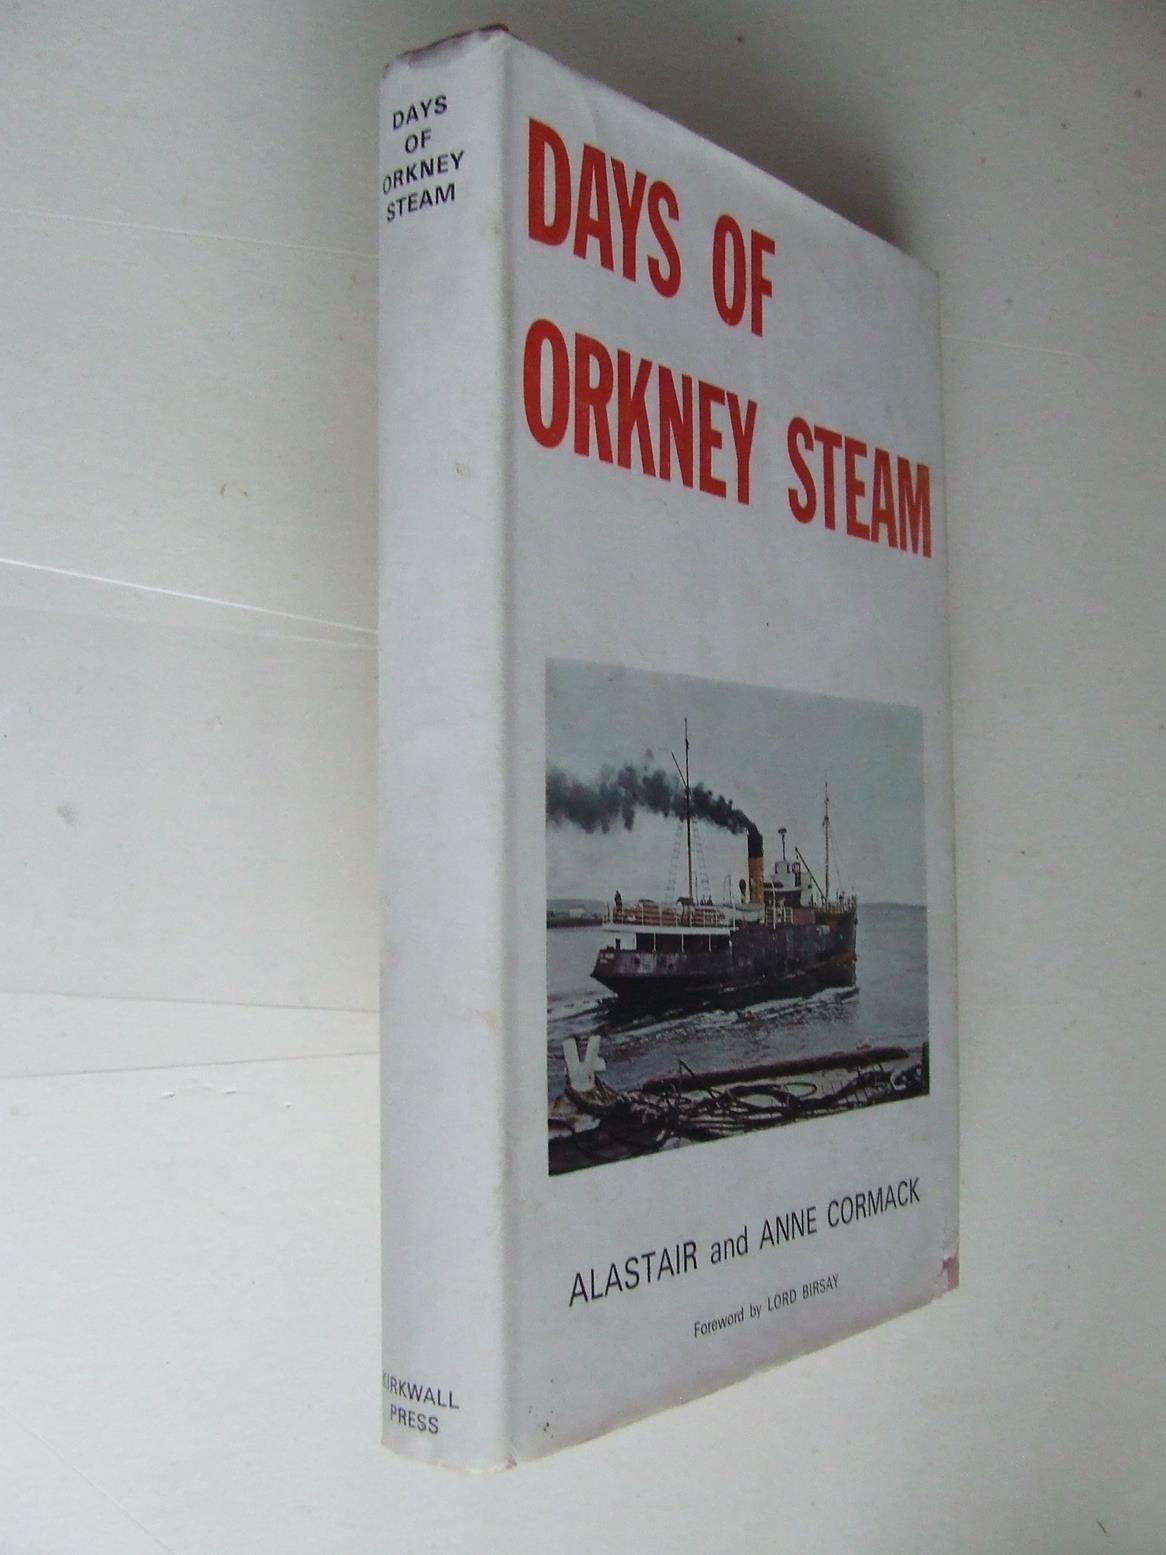 Days of Orkney Steam